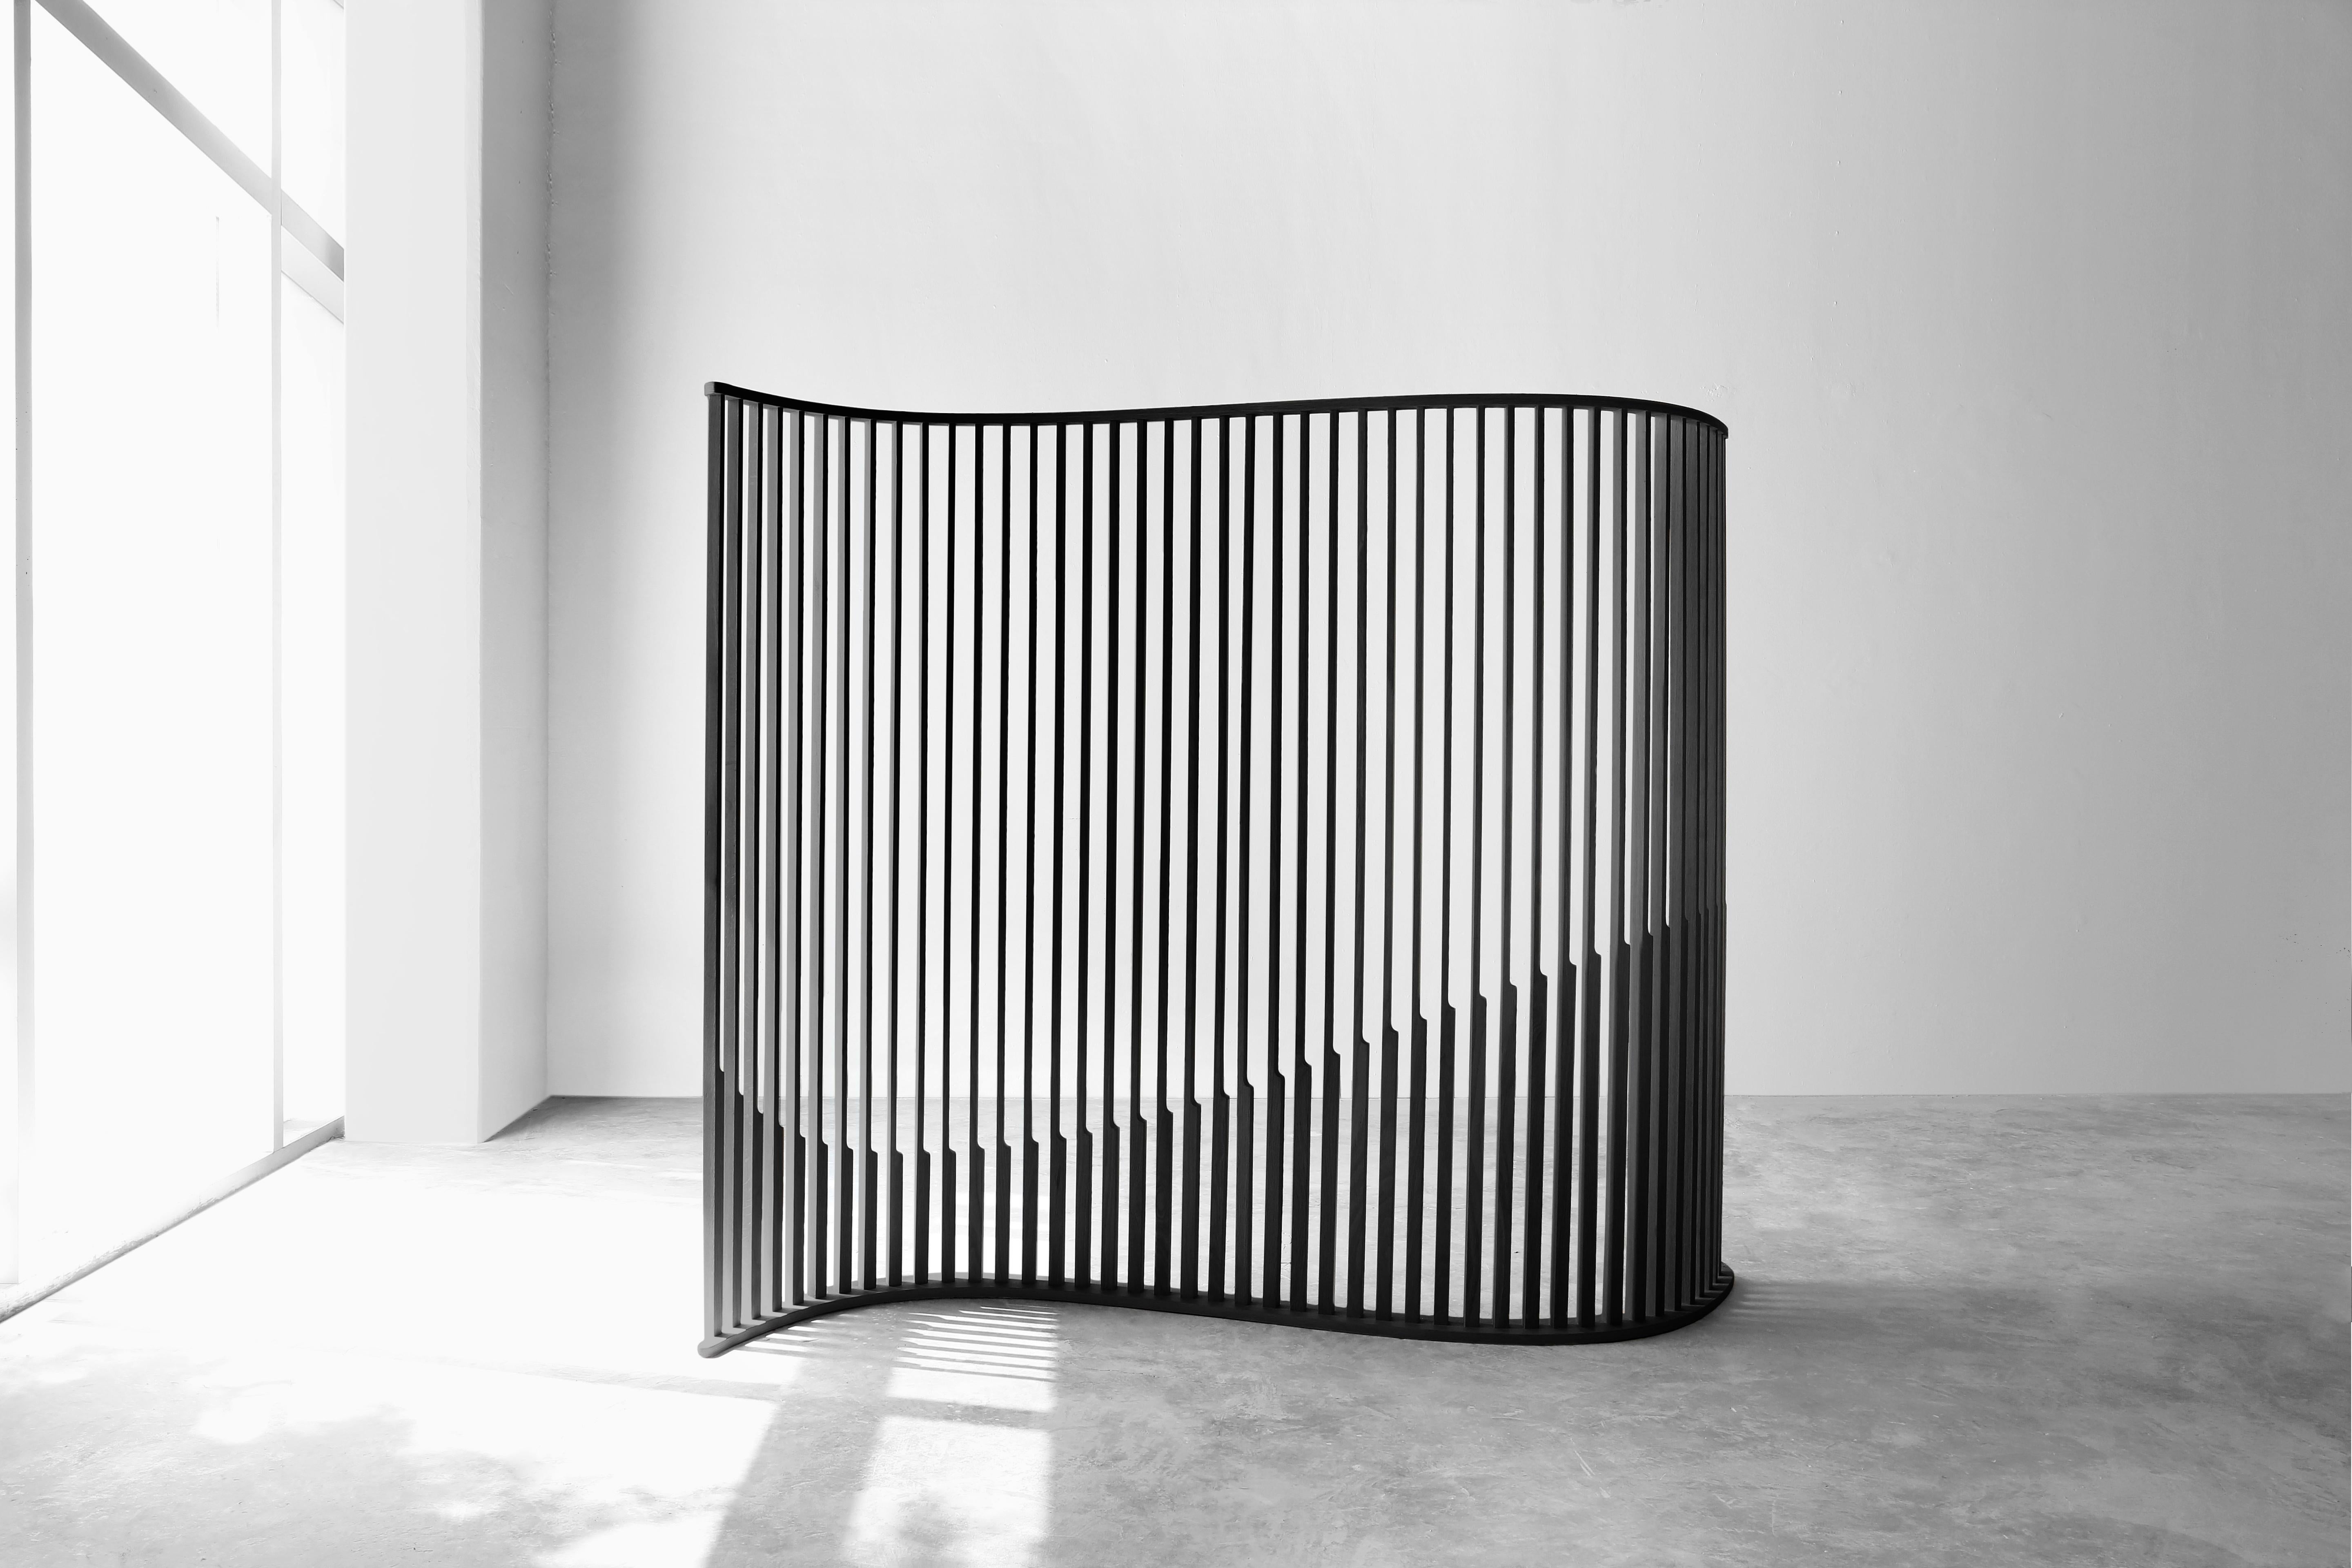 Laws of Motion Room Divider in Burn Wood, Space Divider Screen by Joel Escalona

Laws of Motion is a furniture collection that through a series of different typologies explores concepts like force, gravity and movement. Each of these functional